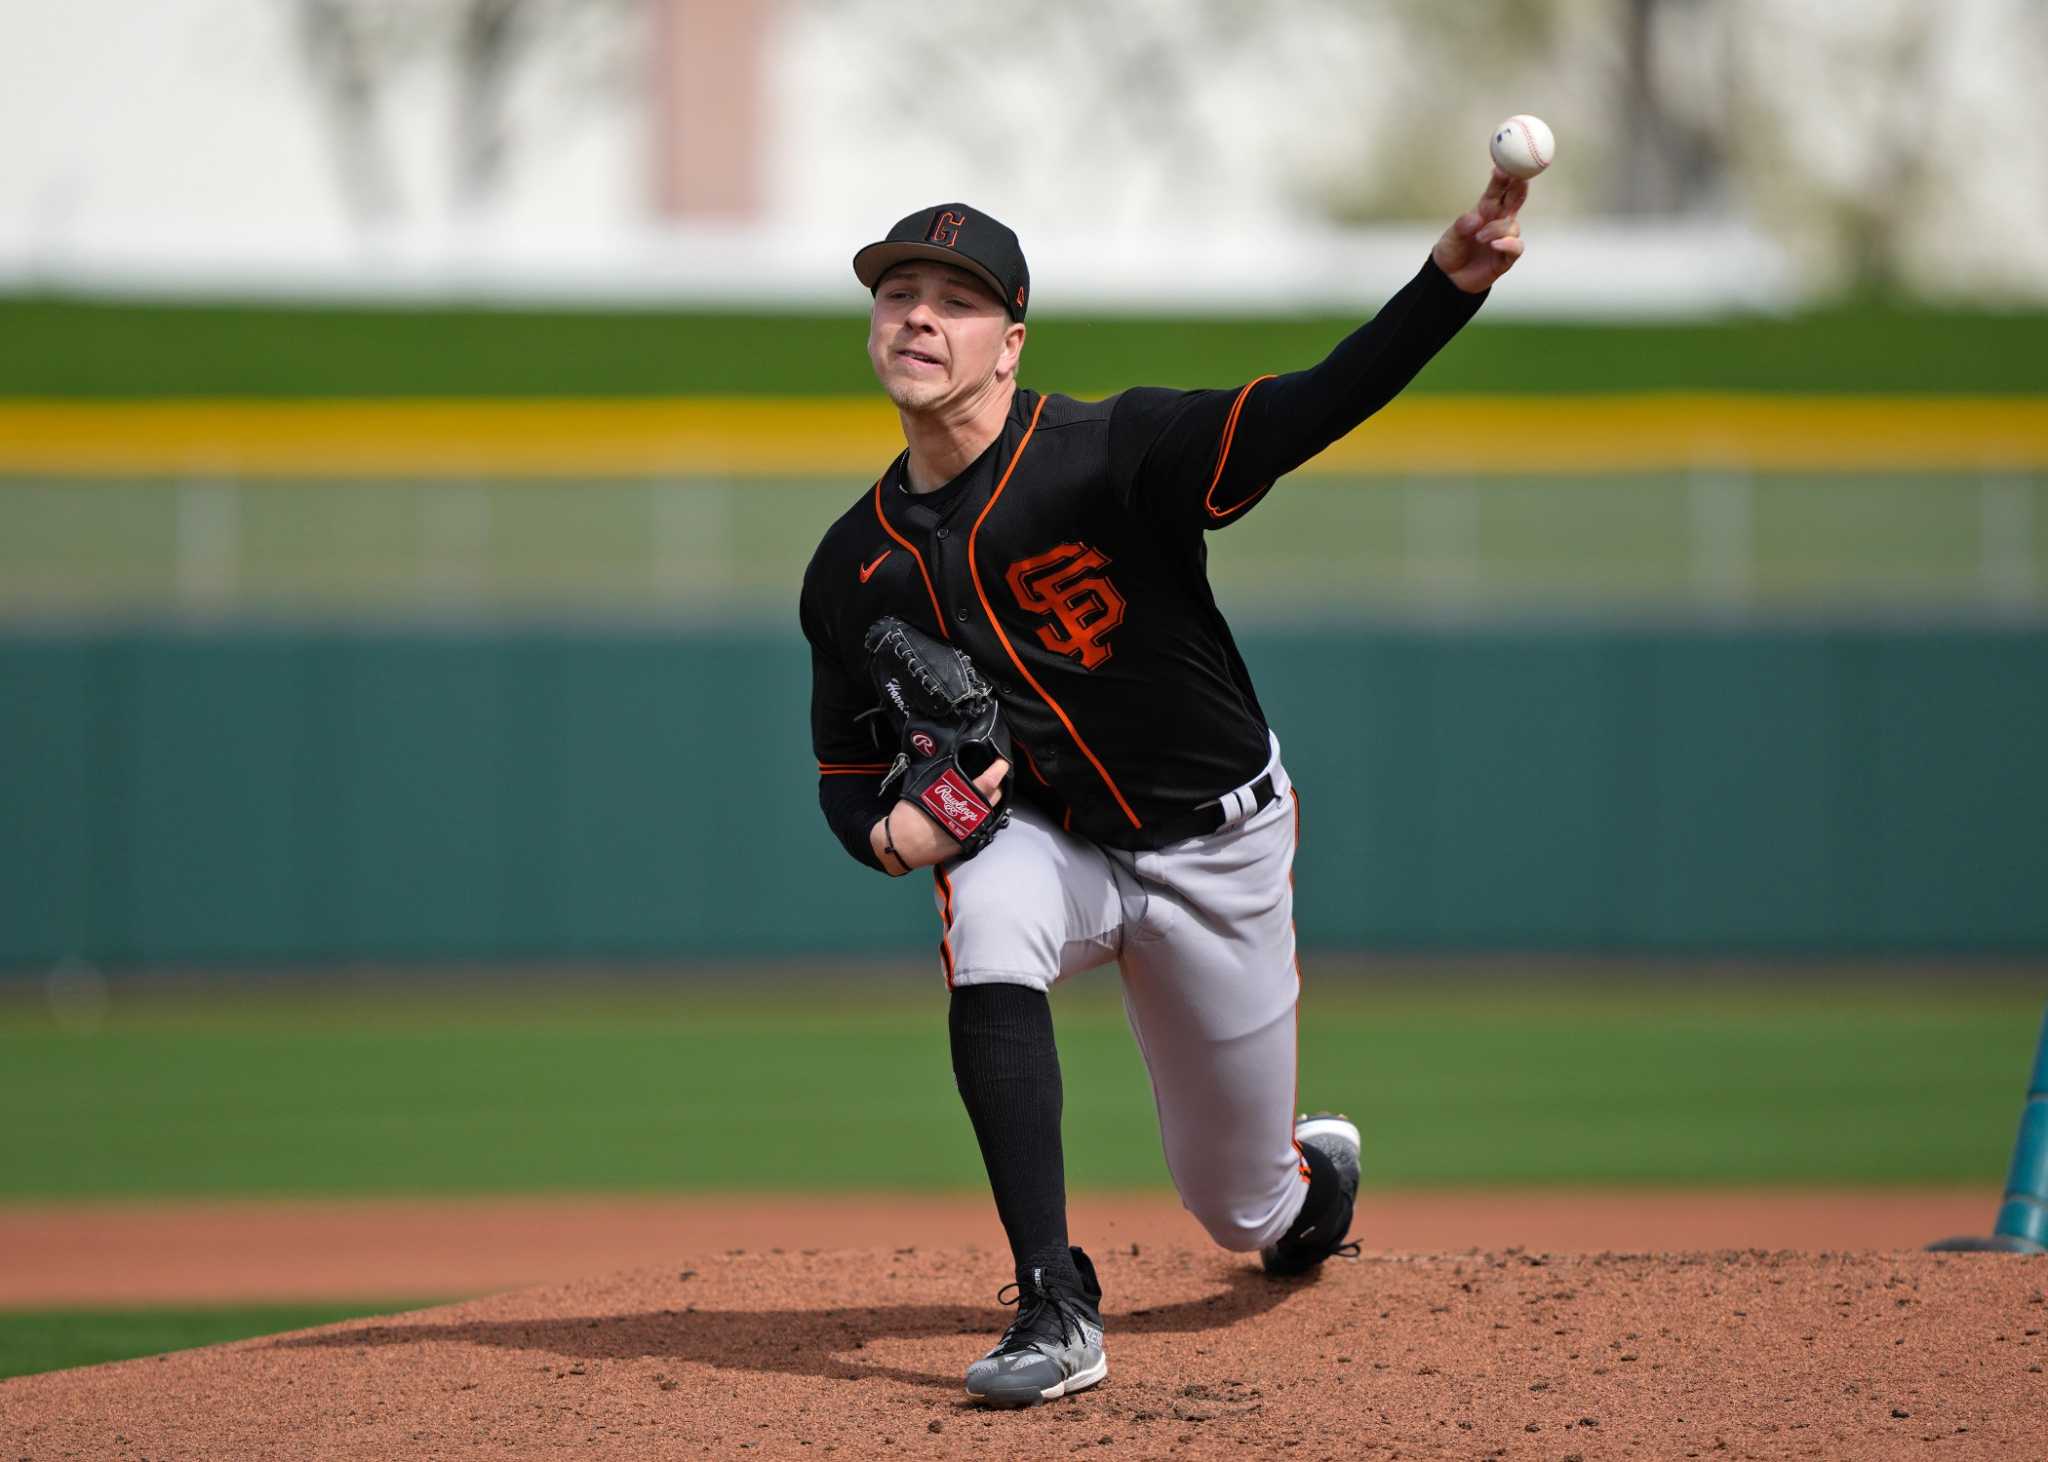 Kyle Harrison injury: SF Giants' top prospect to miss Futures Game